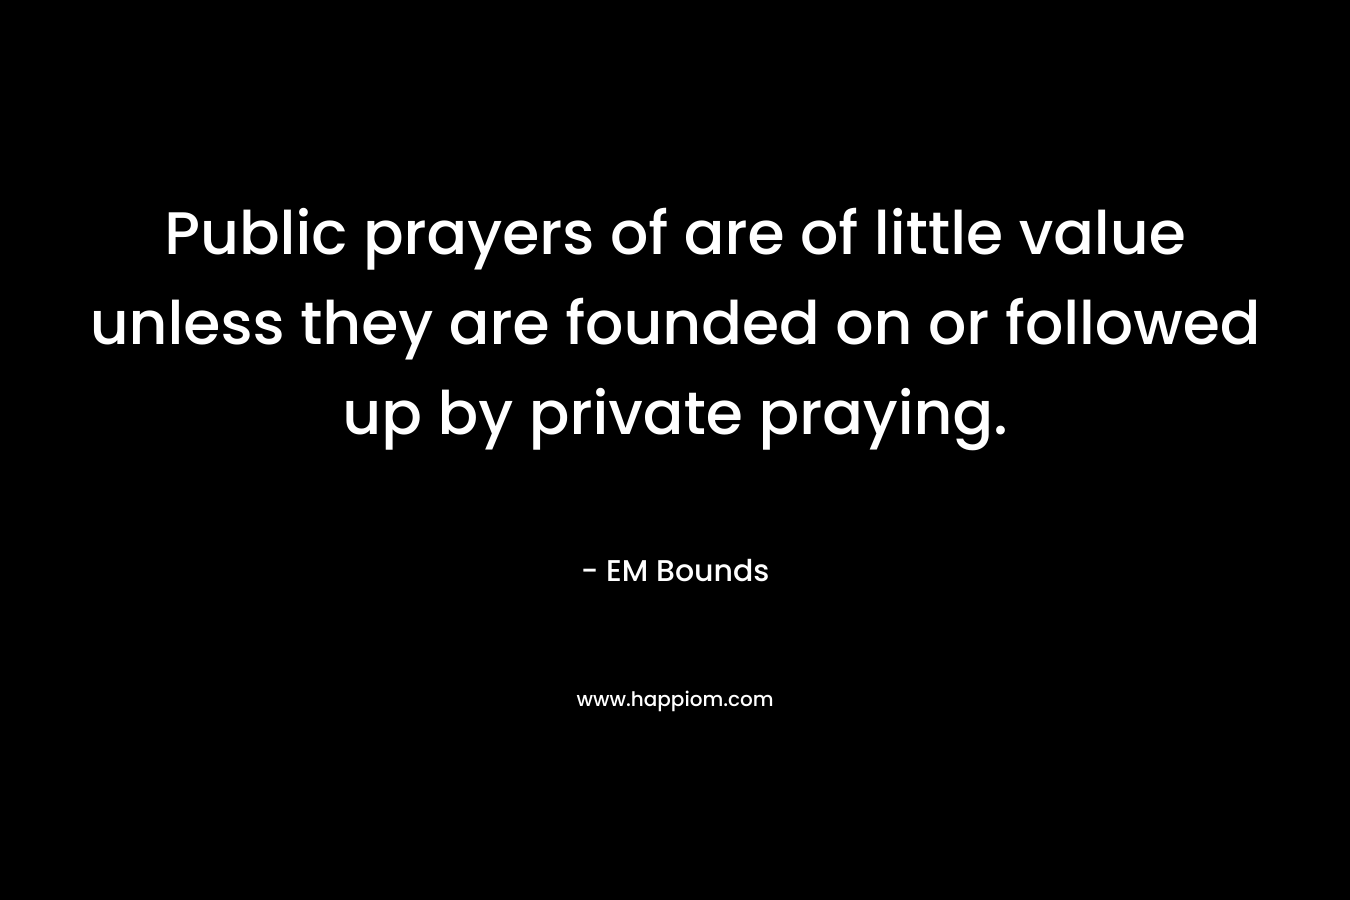 Public prayers of are of little value unless they are founded on or followed up by private praying.